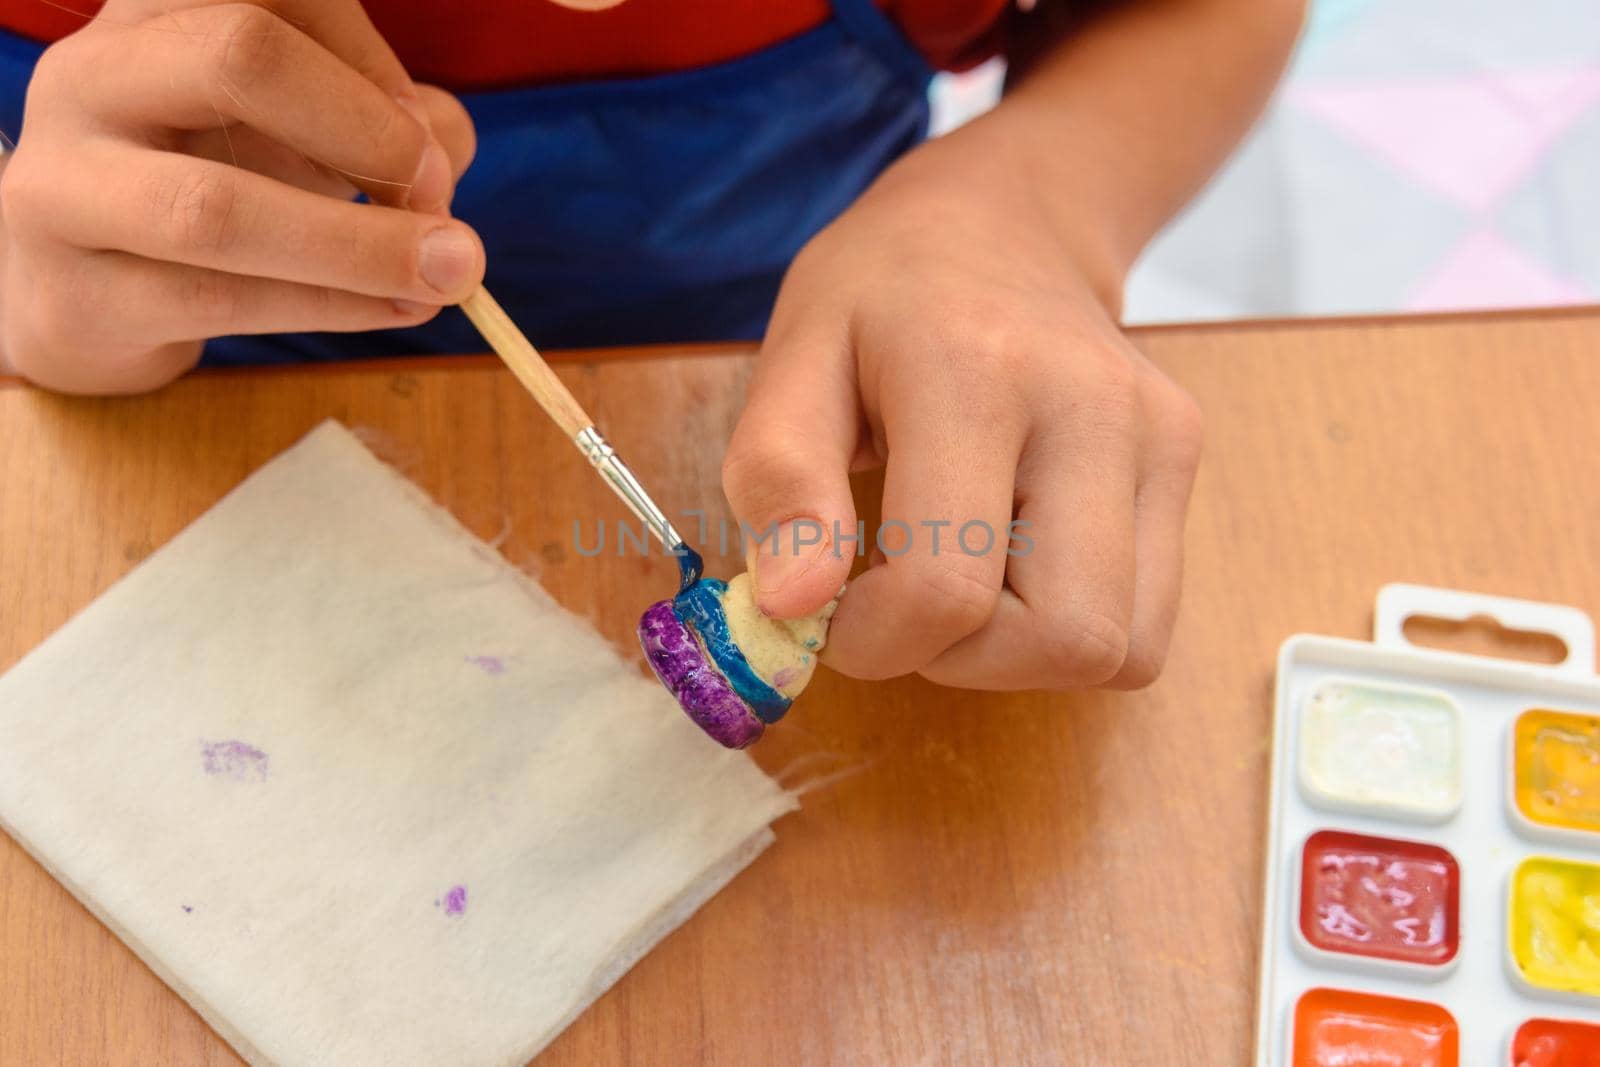 A girl paints a figurine made of salt dough with a brush